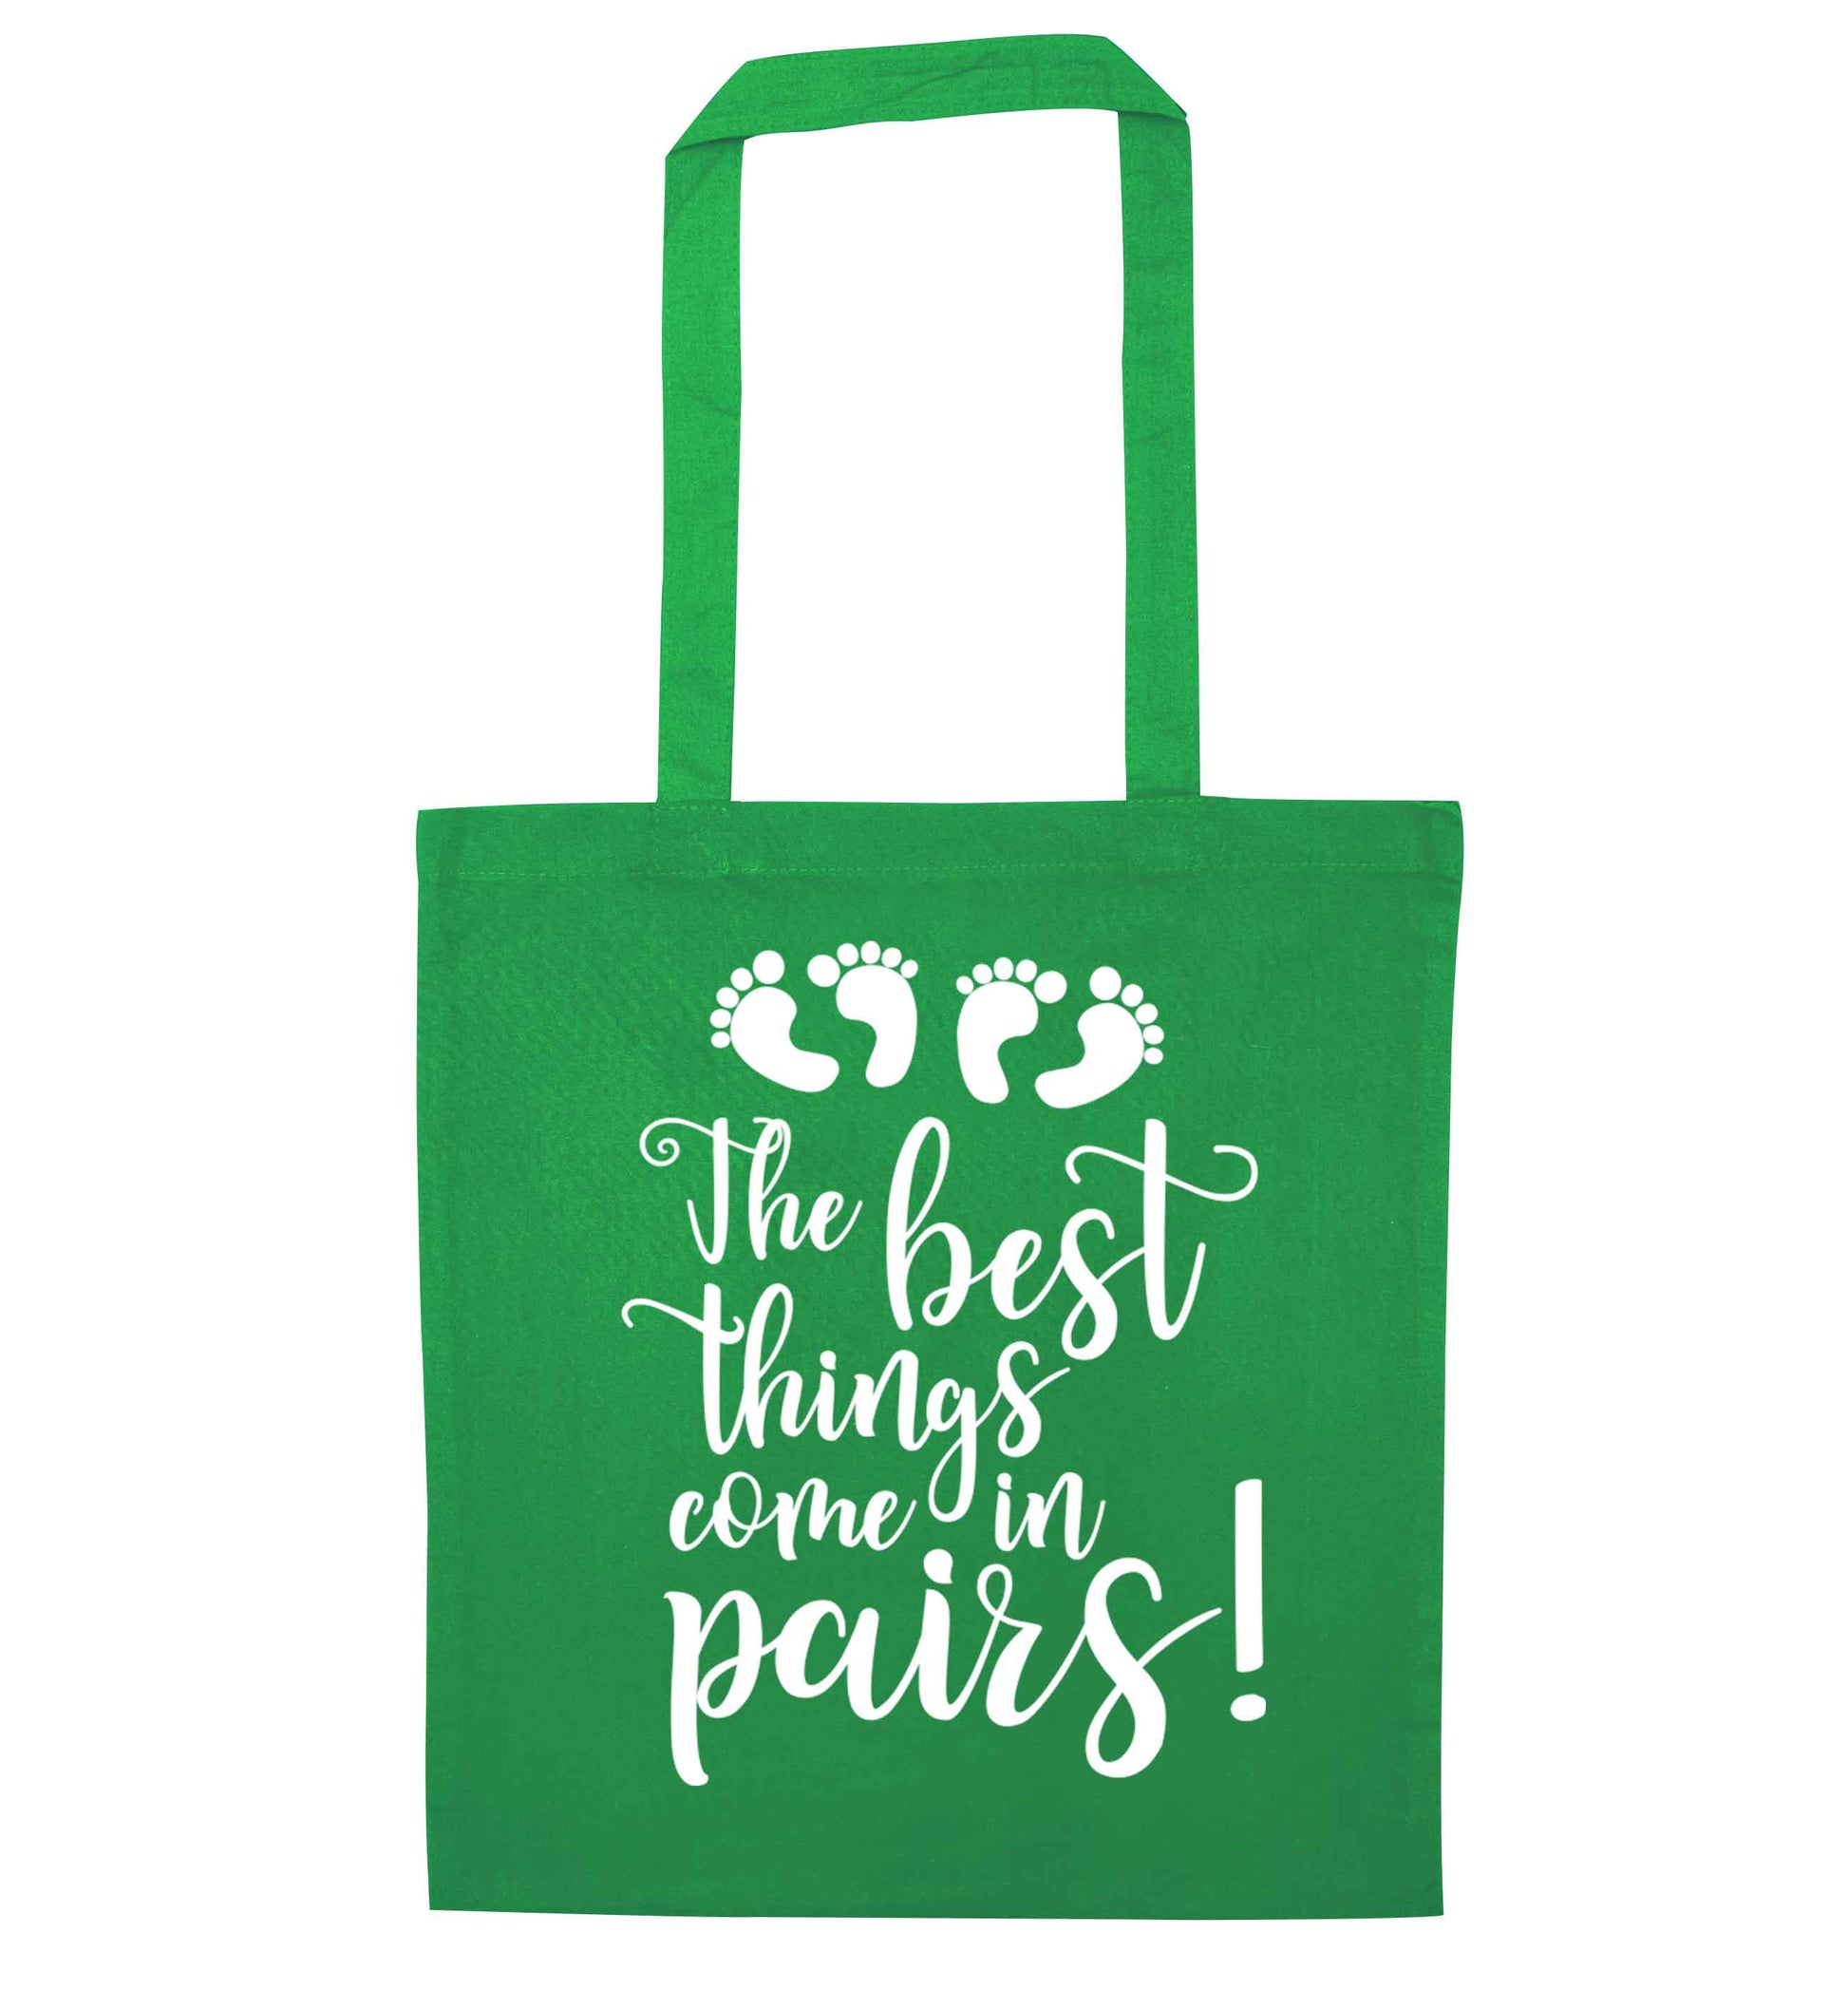 The best things come in pairs! green tote bag